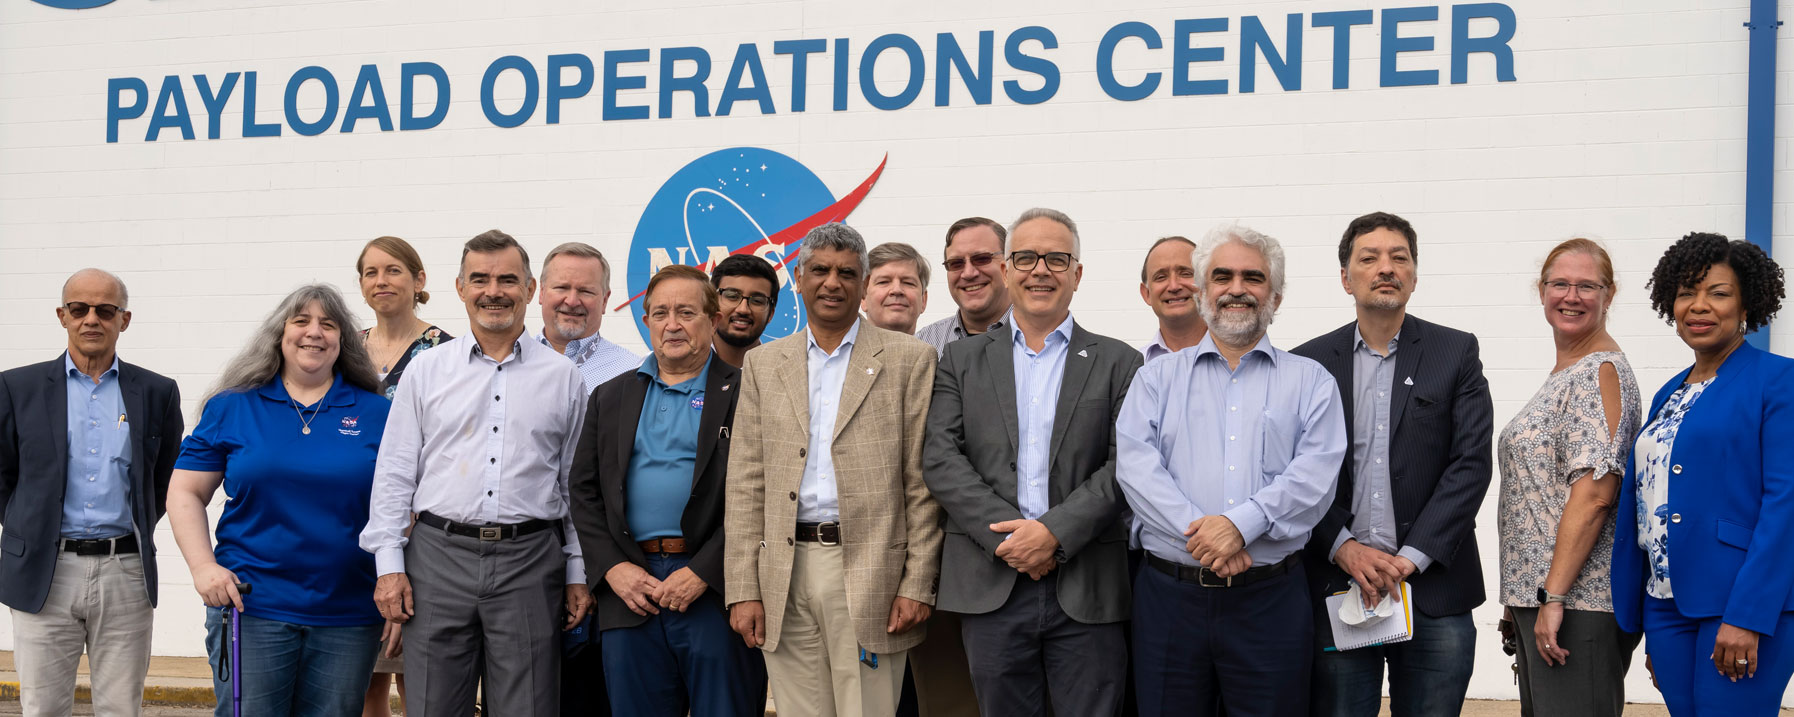 Senior officials from the Brazilian Space Agency, the Brazilian Ministry for Science, Technology, and Innovation, and a professor from Brazil’s Technological Institute of Aeronautics pose for a photograph with NASA team members 